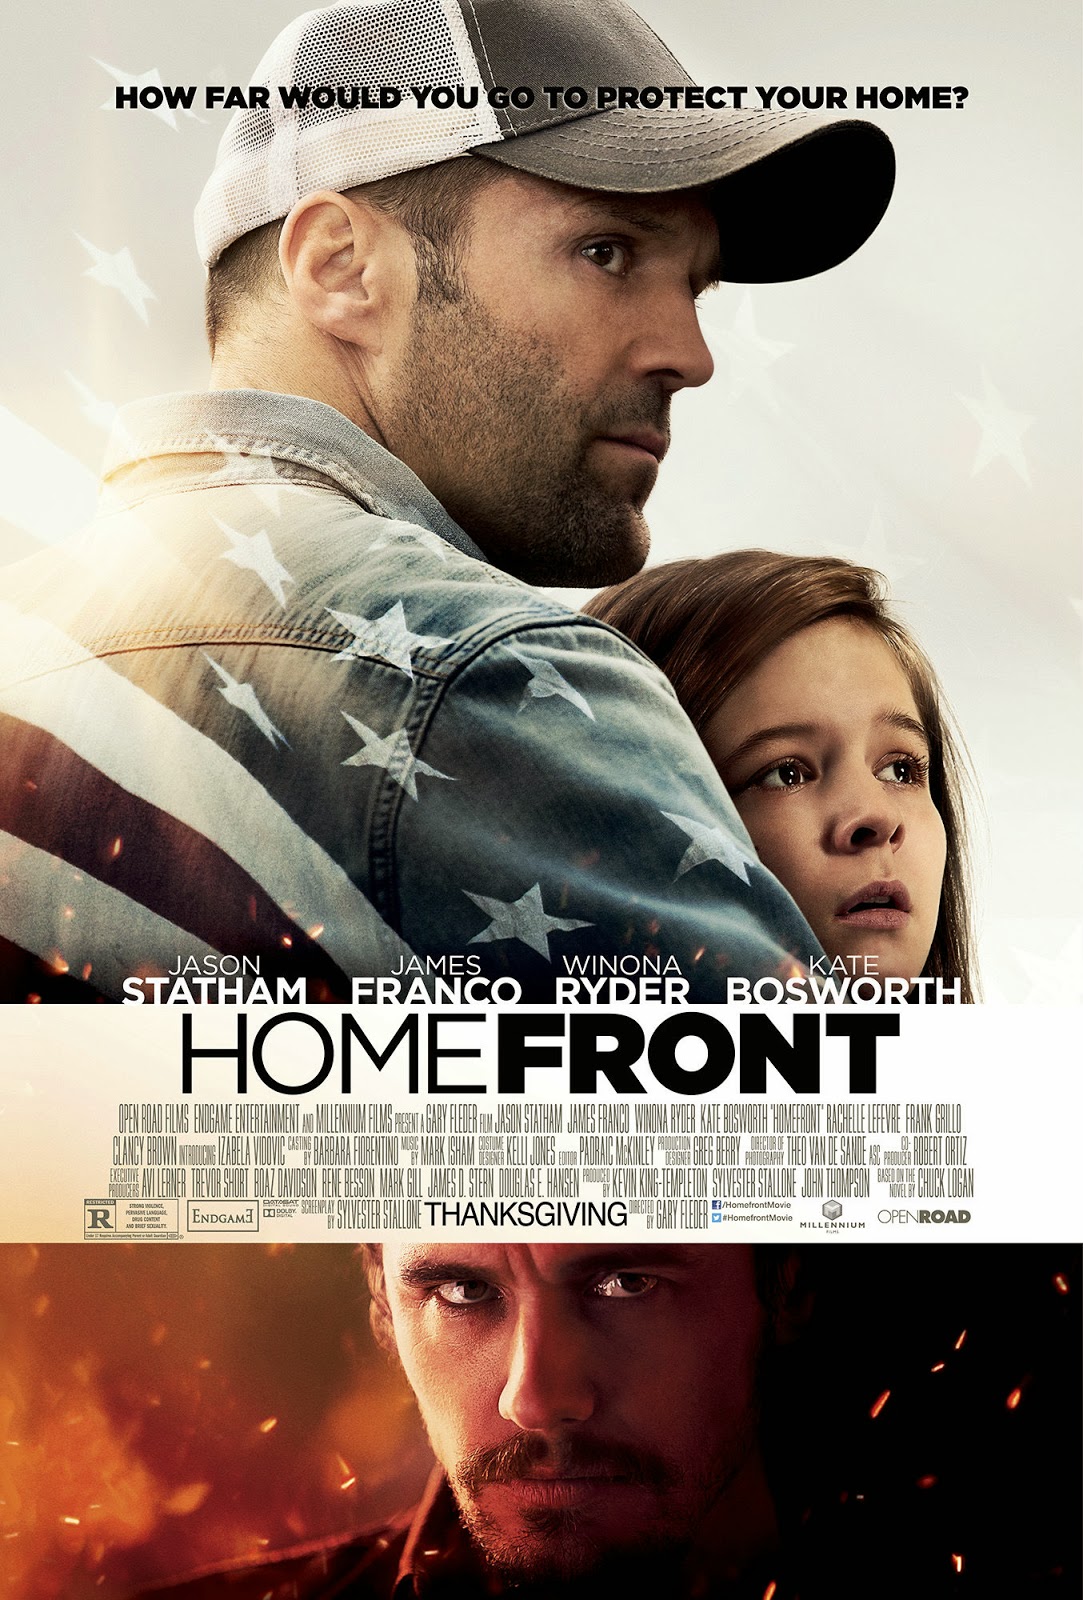 two-dudes-doing-movie-reviews-action-movie-reviews-homefront-2013